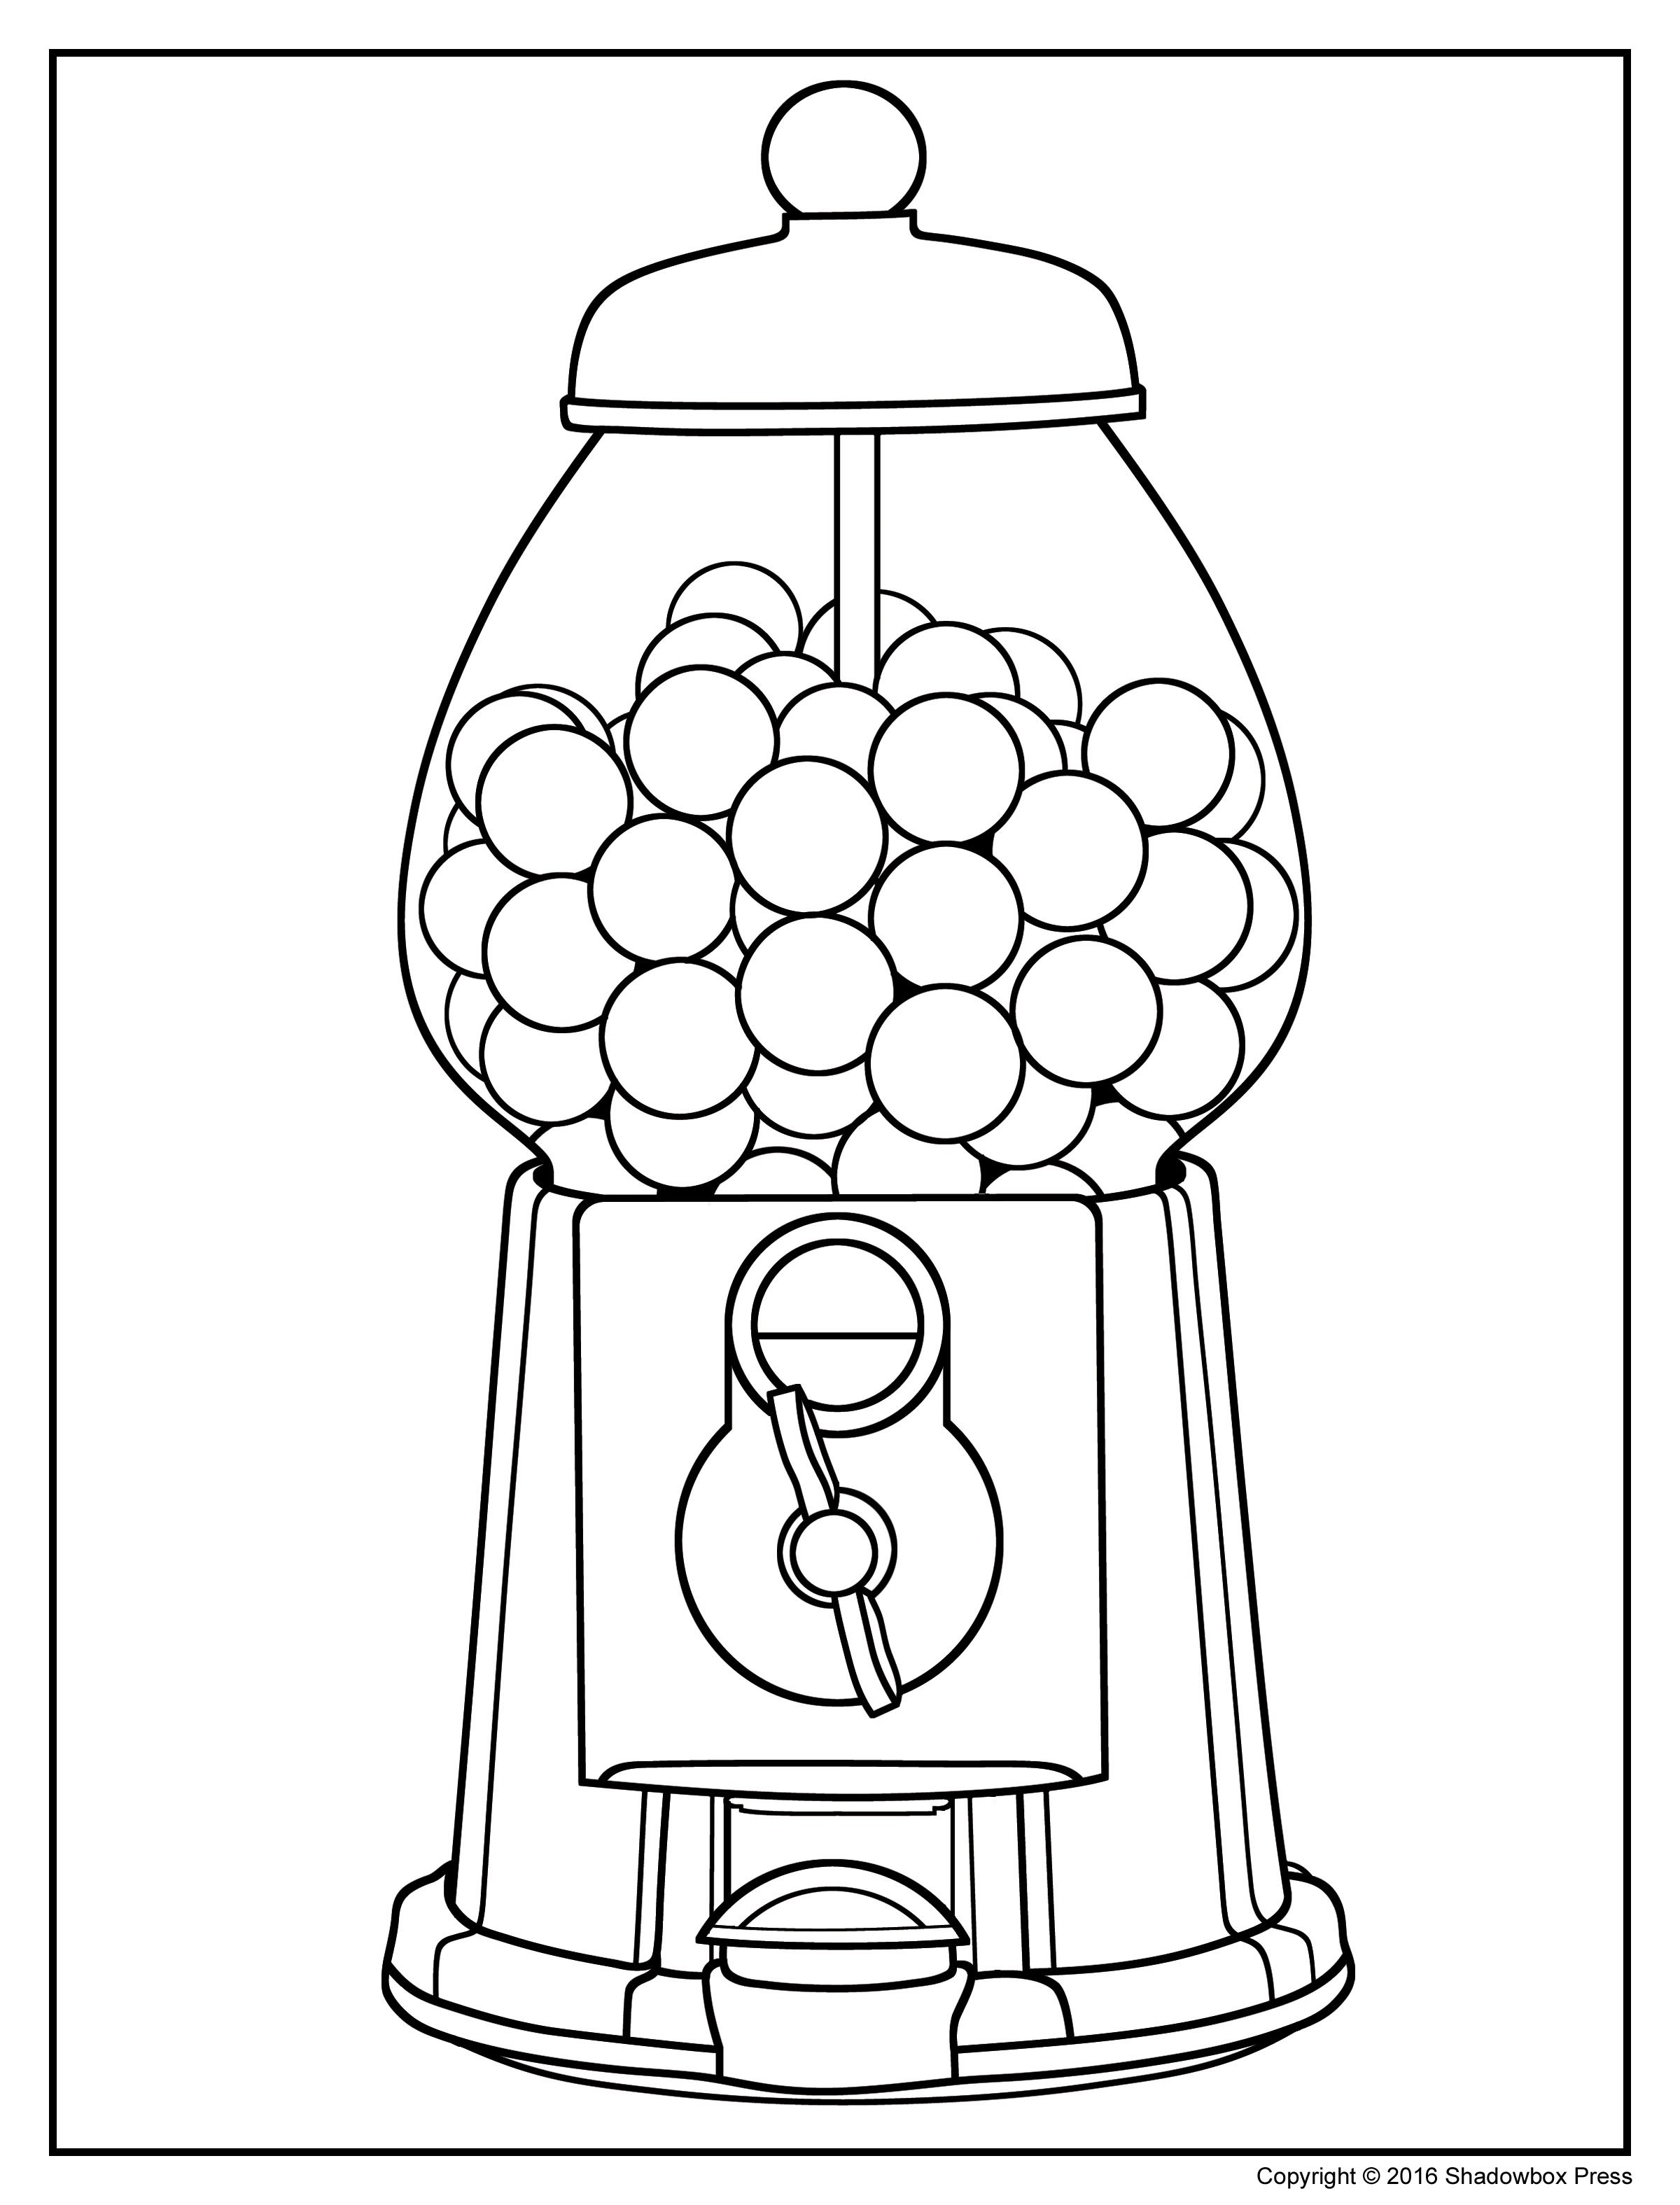 Free Downloadable Coloring Pages For Adults at GetColorings.com | Free